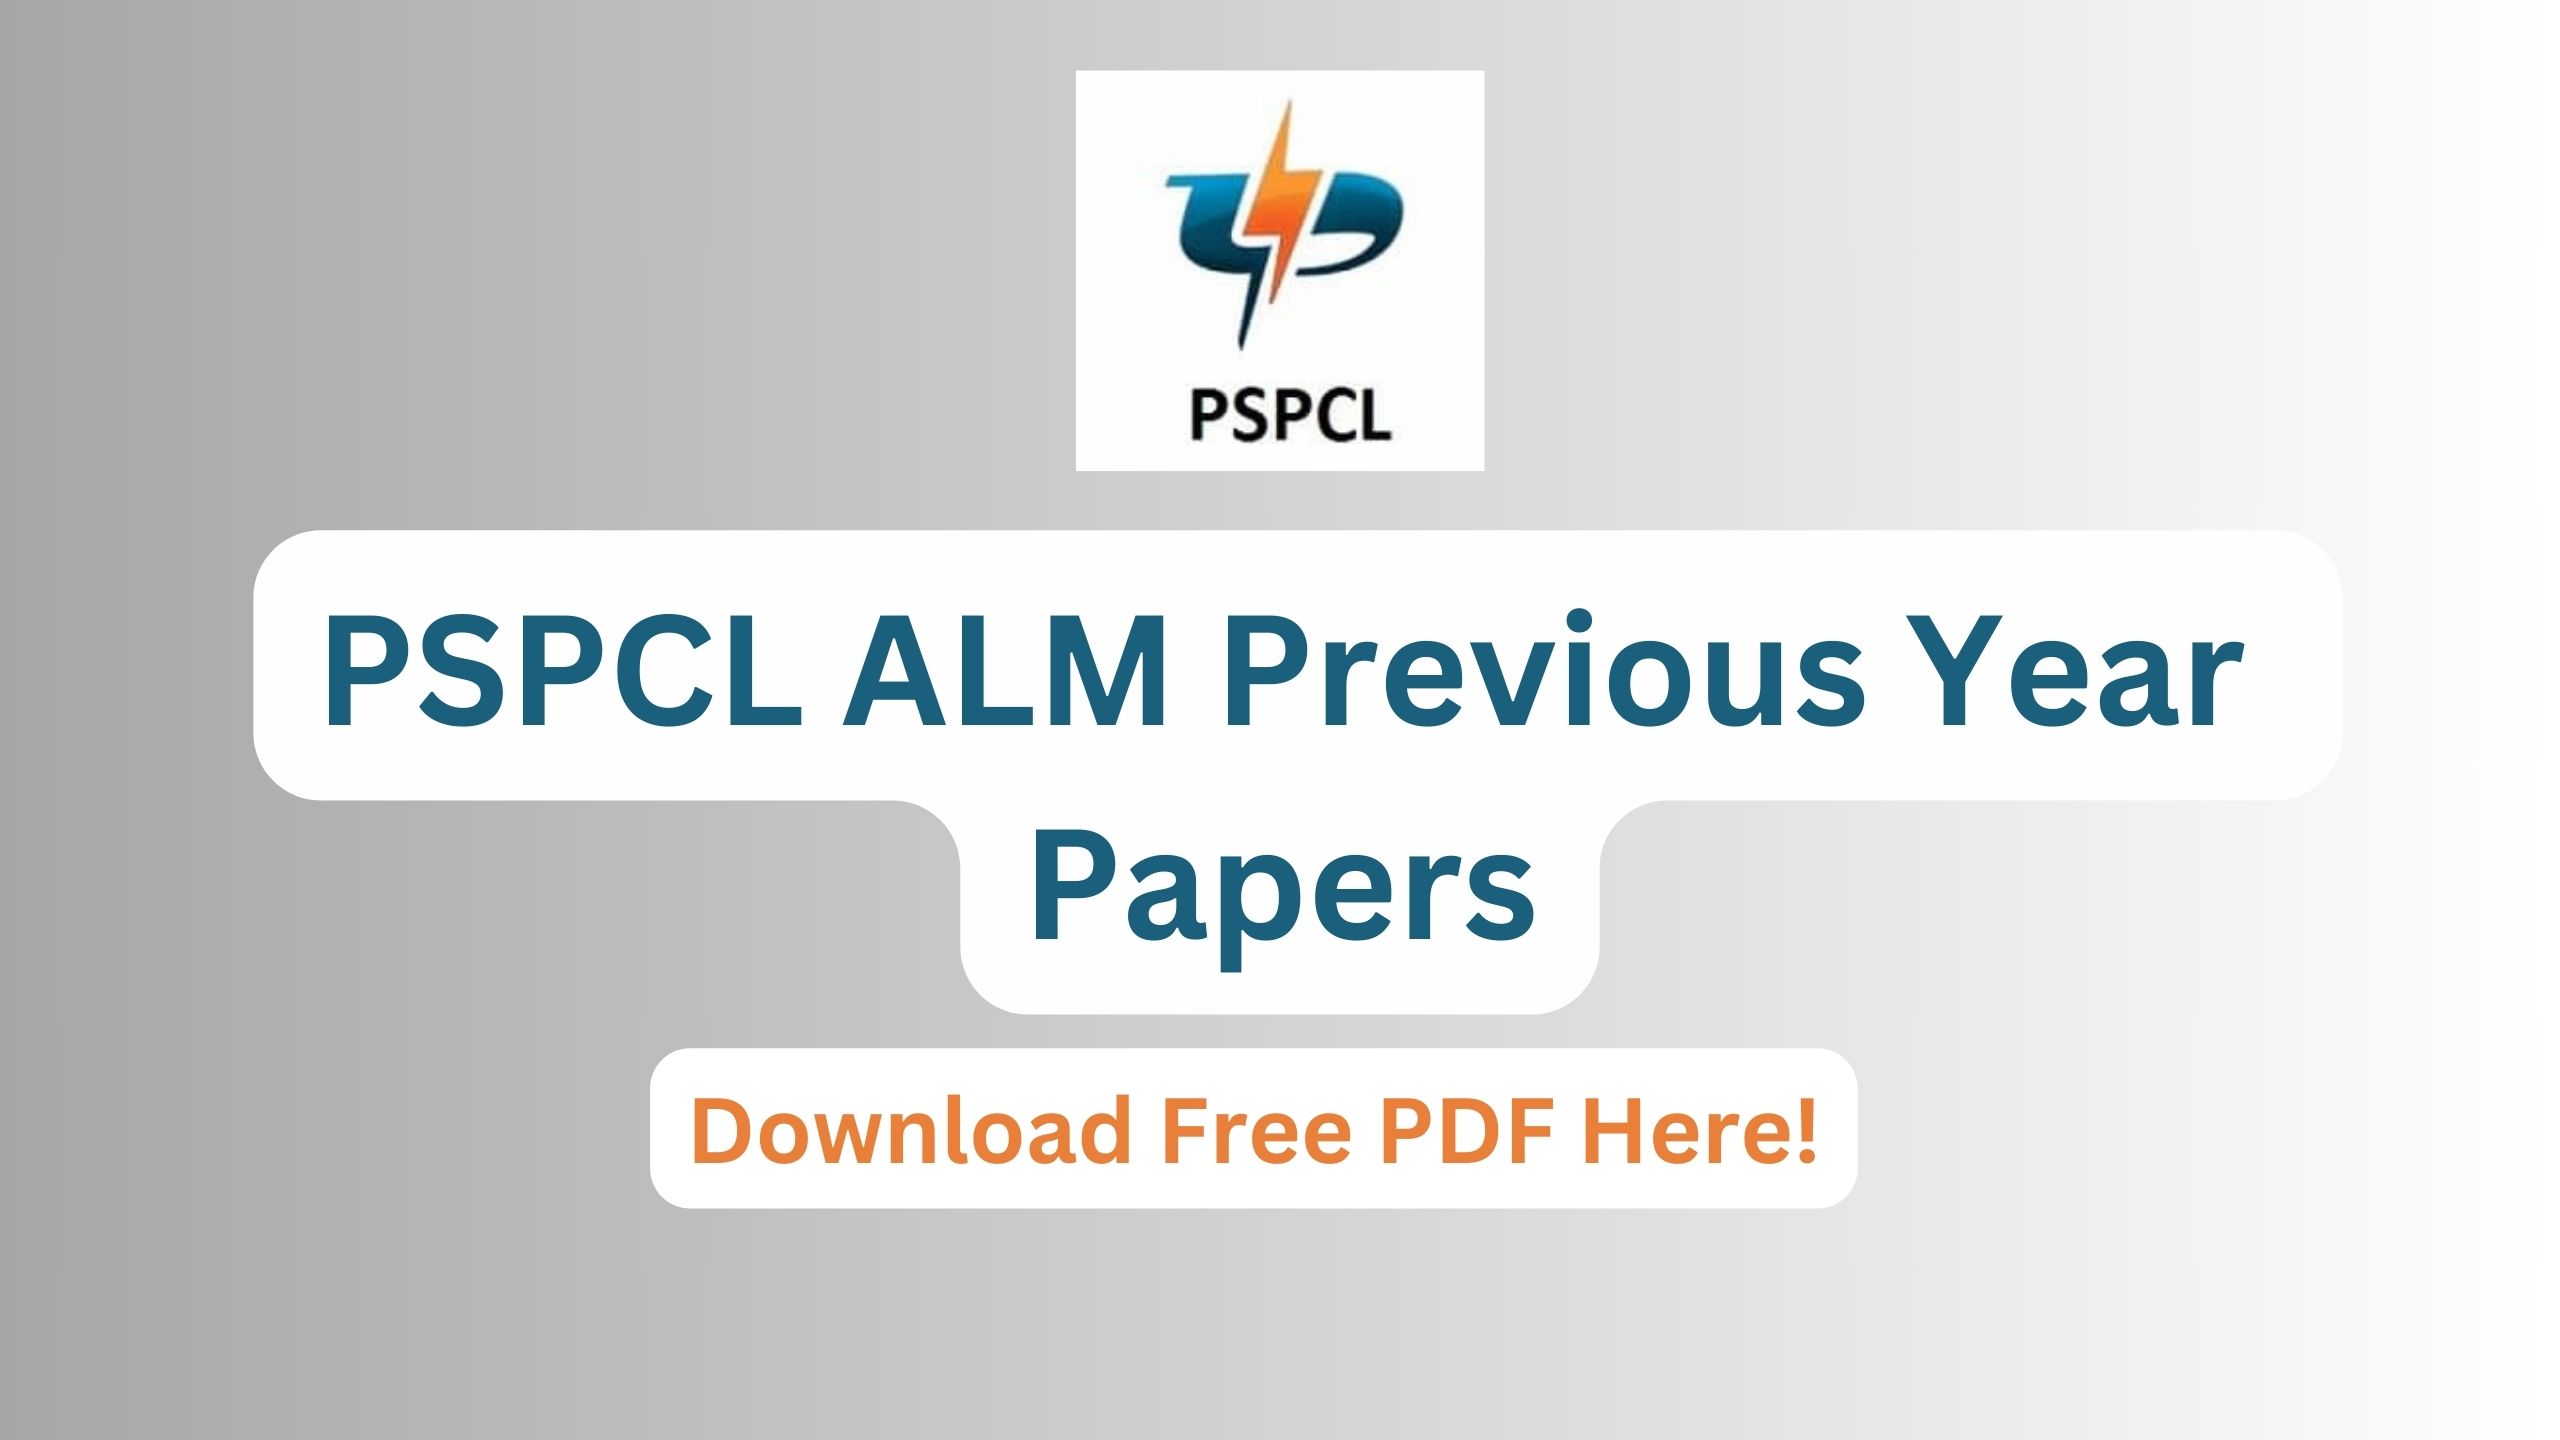 PSPCL ALM Previous Year Papers